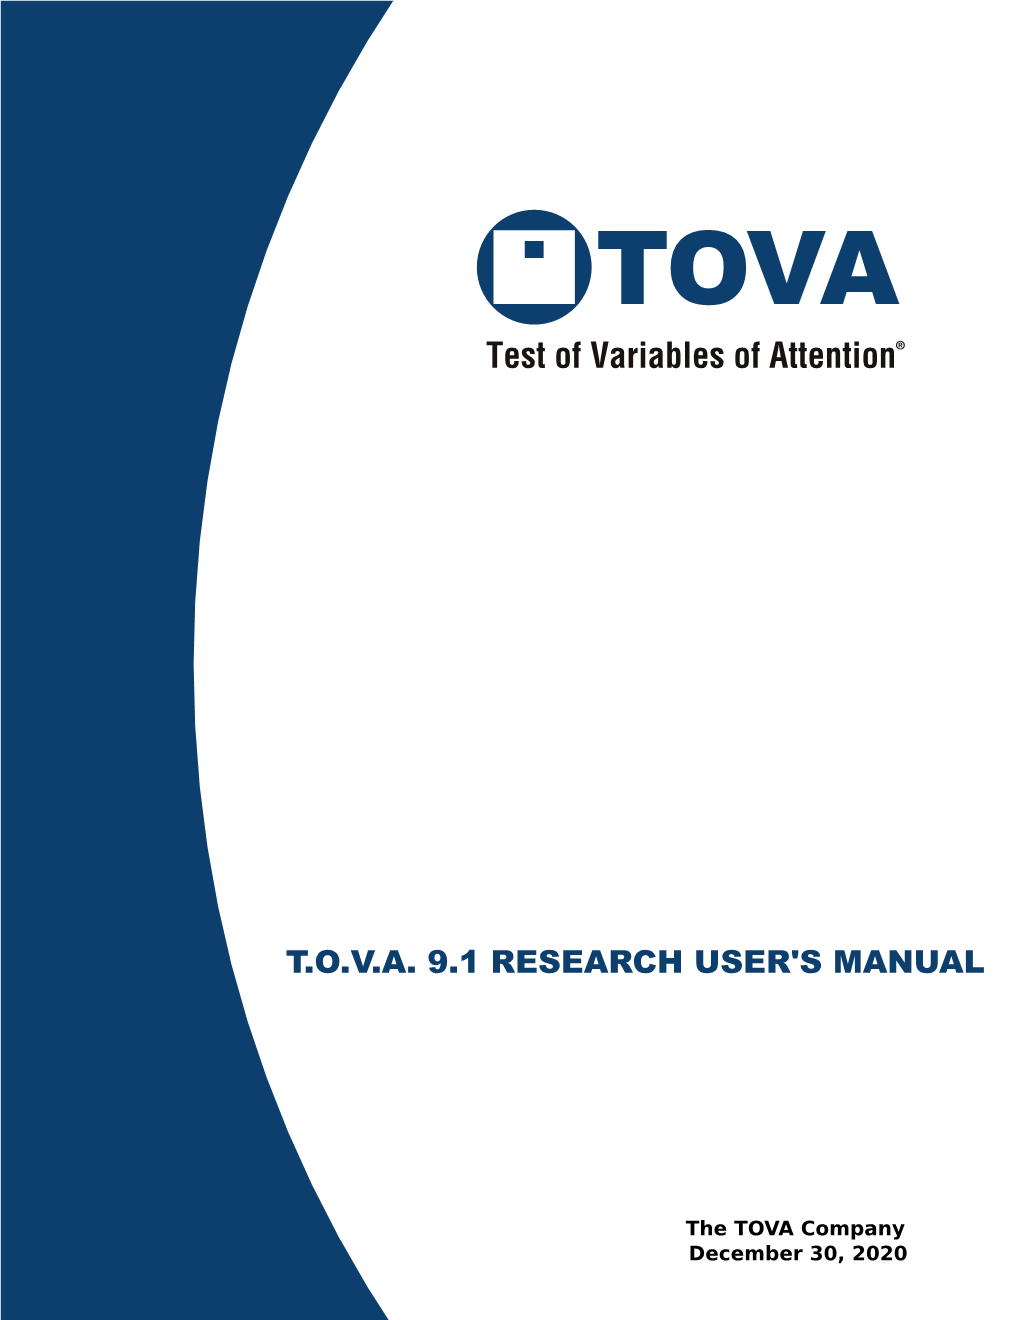 T.O.V.A. 9.1 Research User's Manual